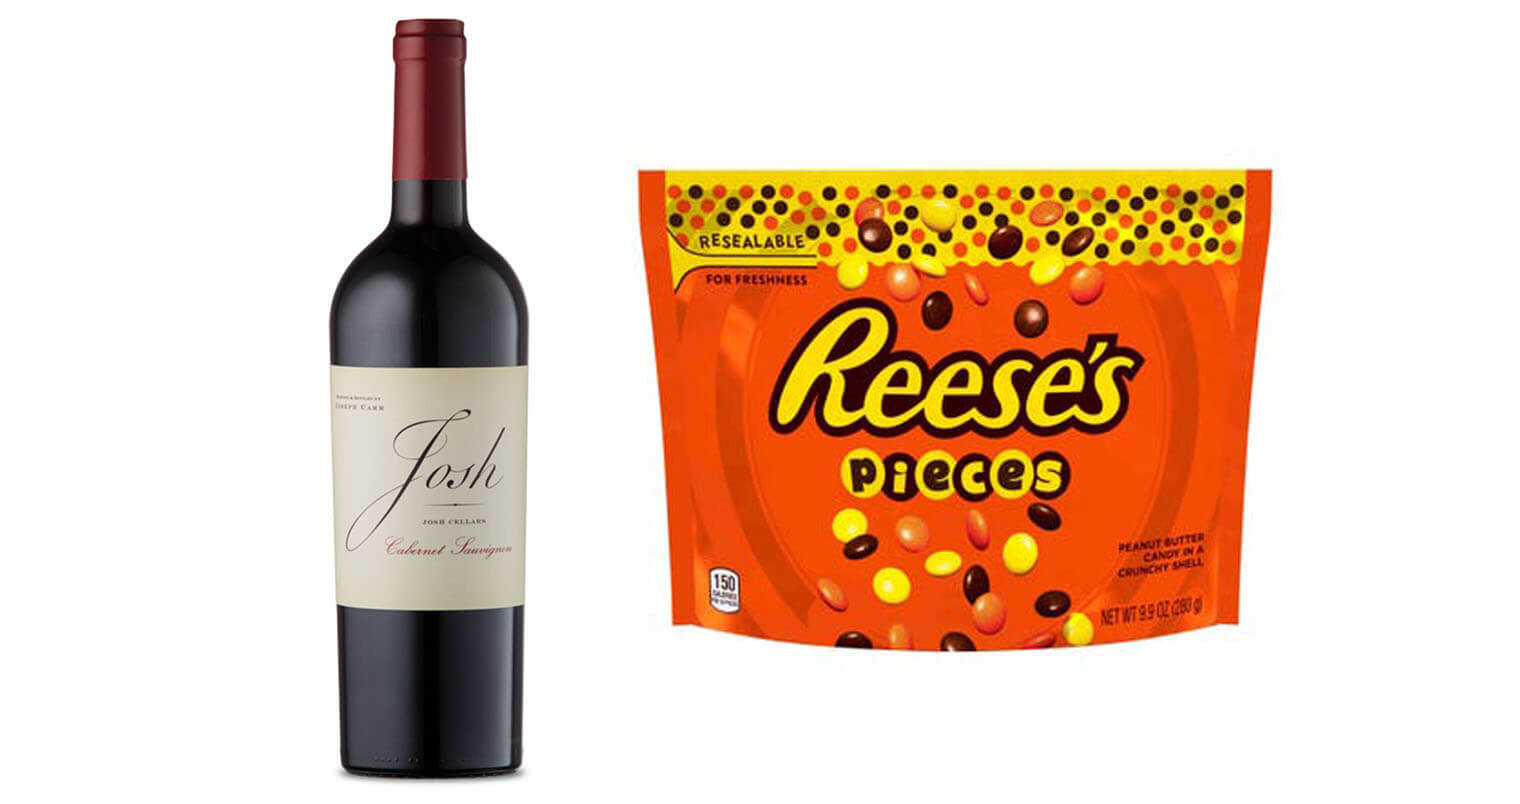 Josh Cellars Cabernet Sauvignon with Reese's, featured image